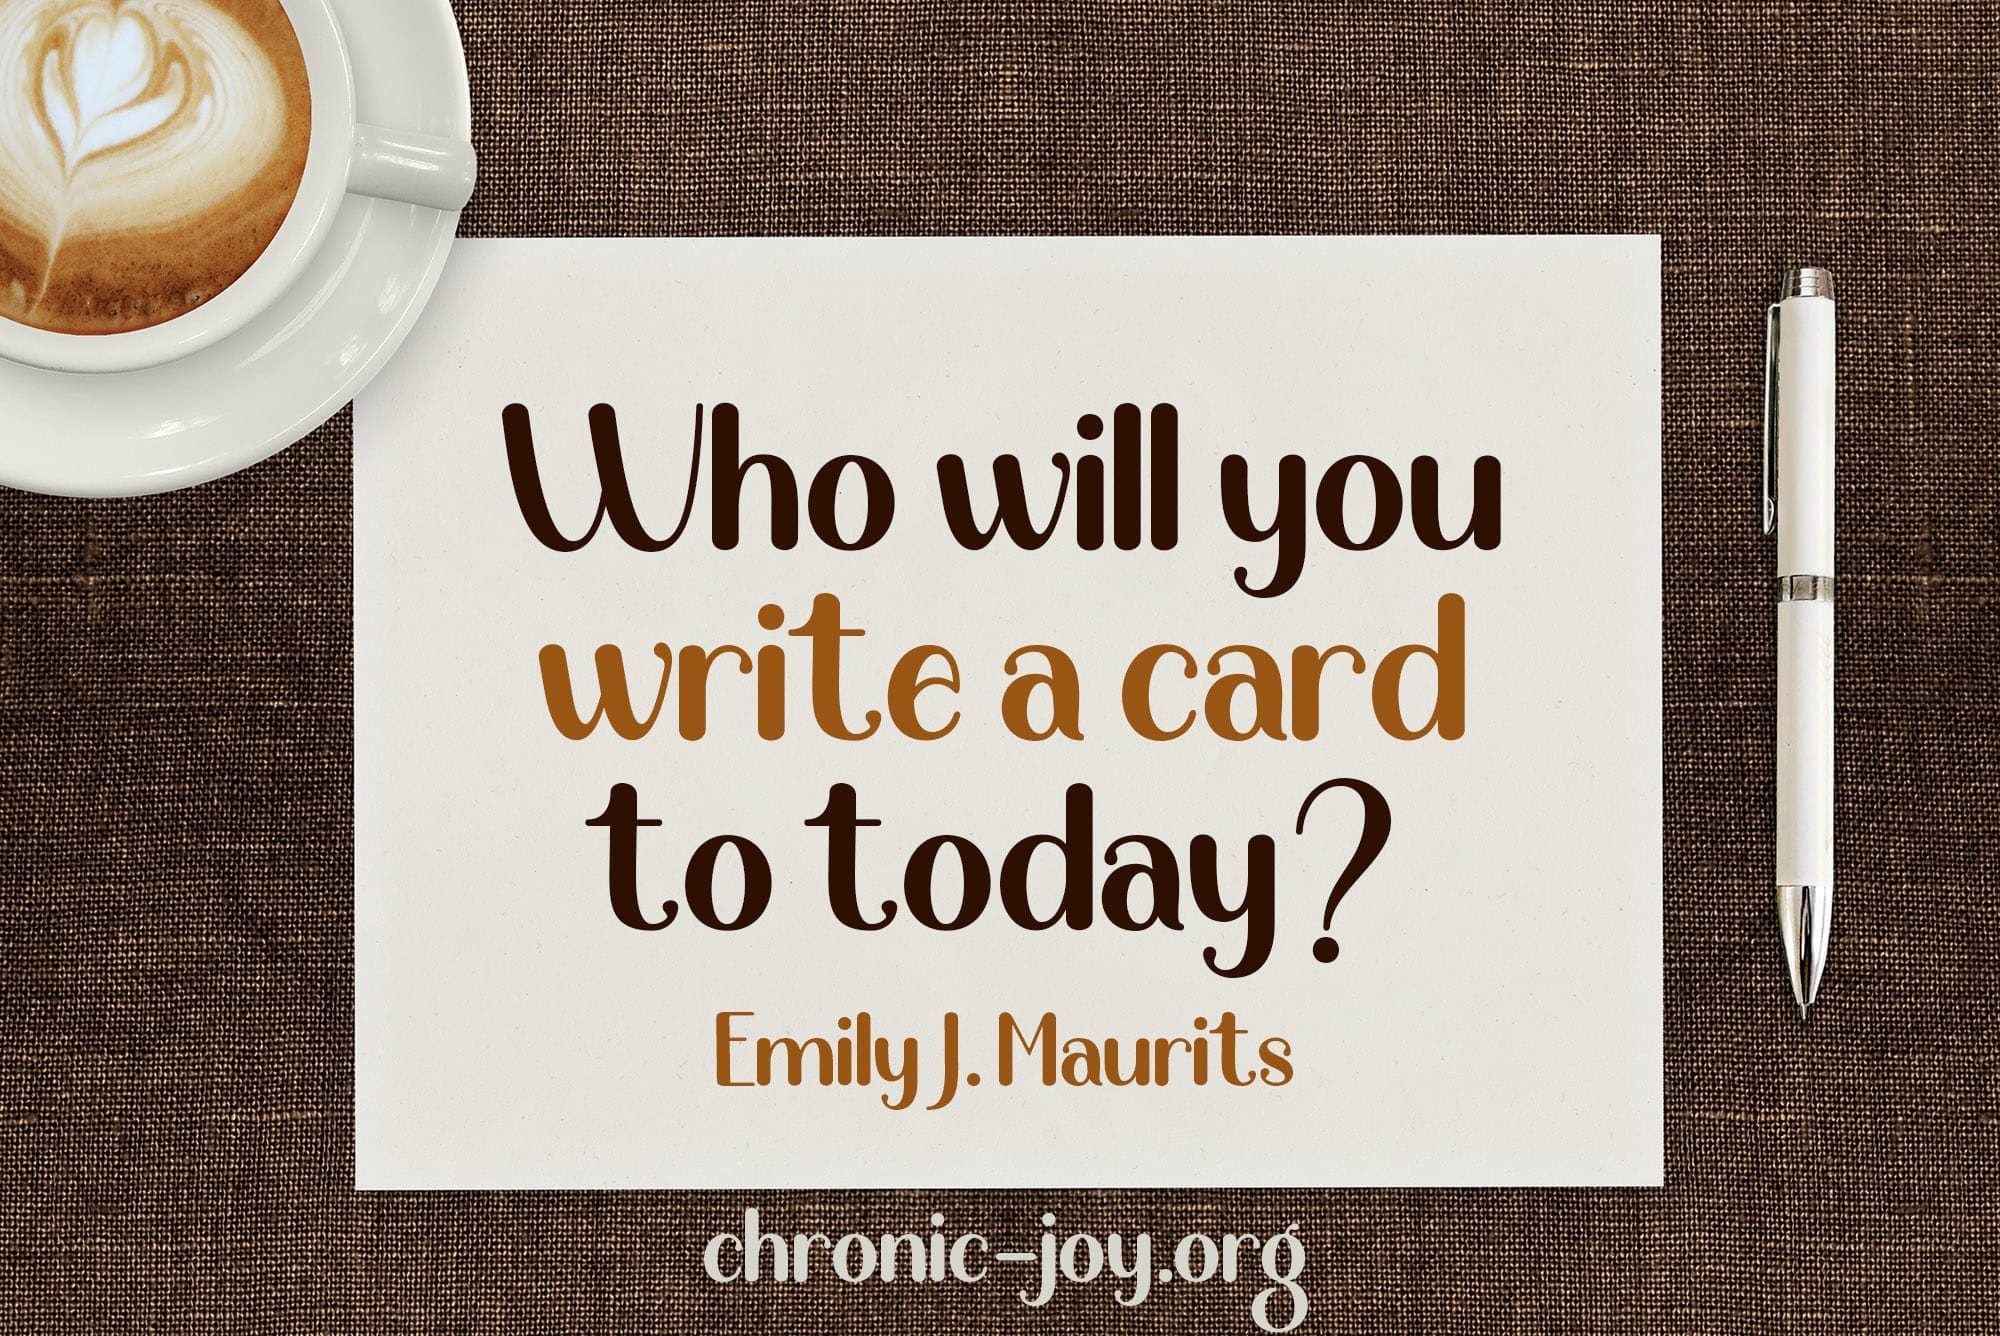 "Who will you write a card to today?" Emily J. Maurits